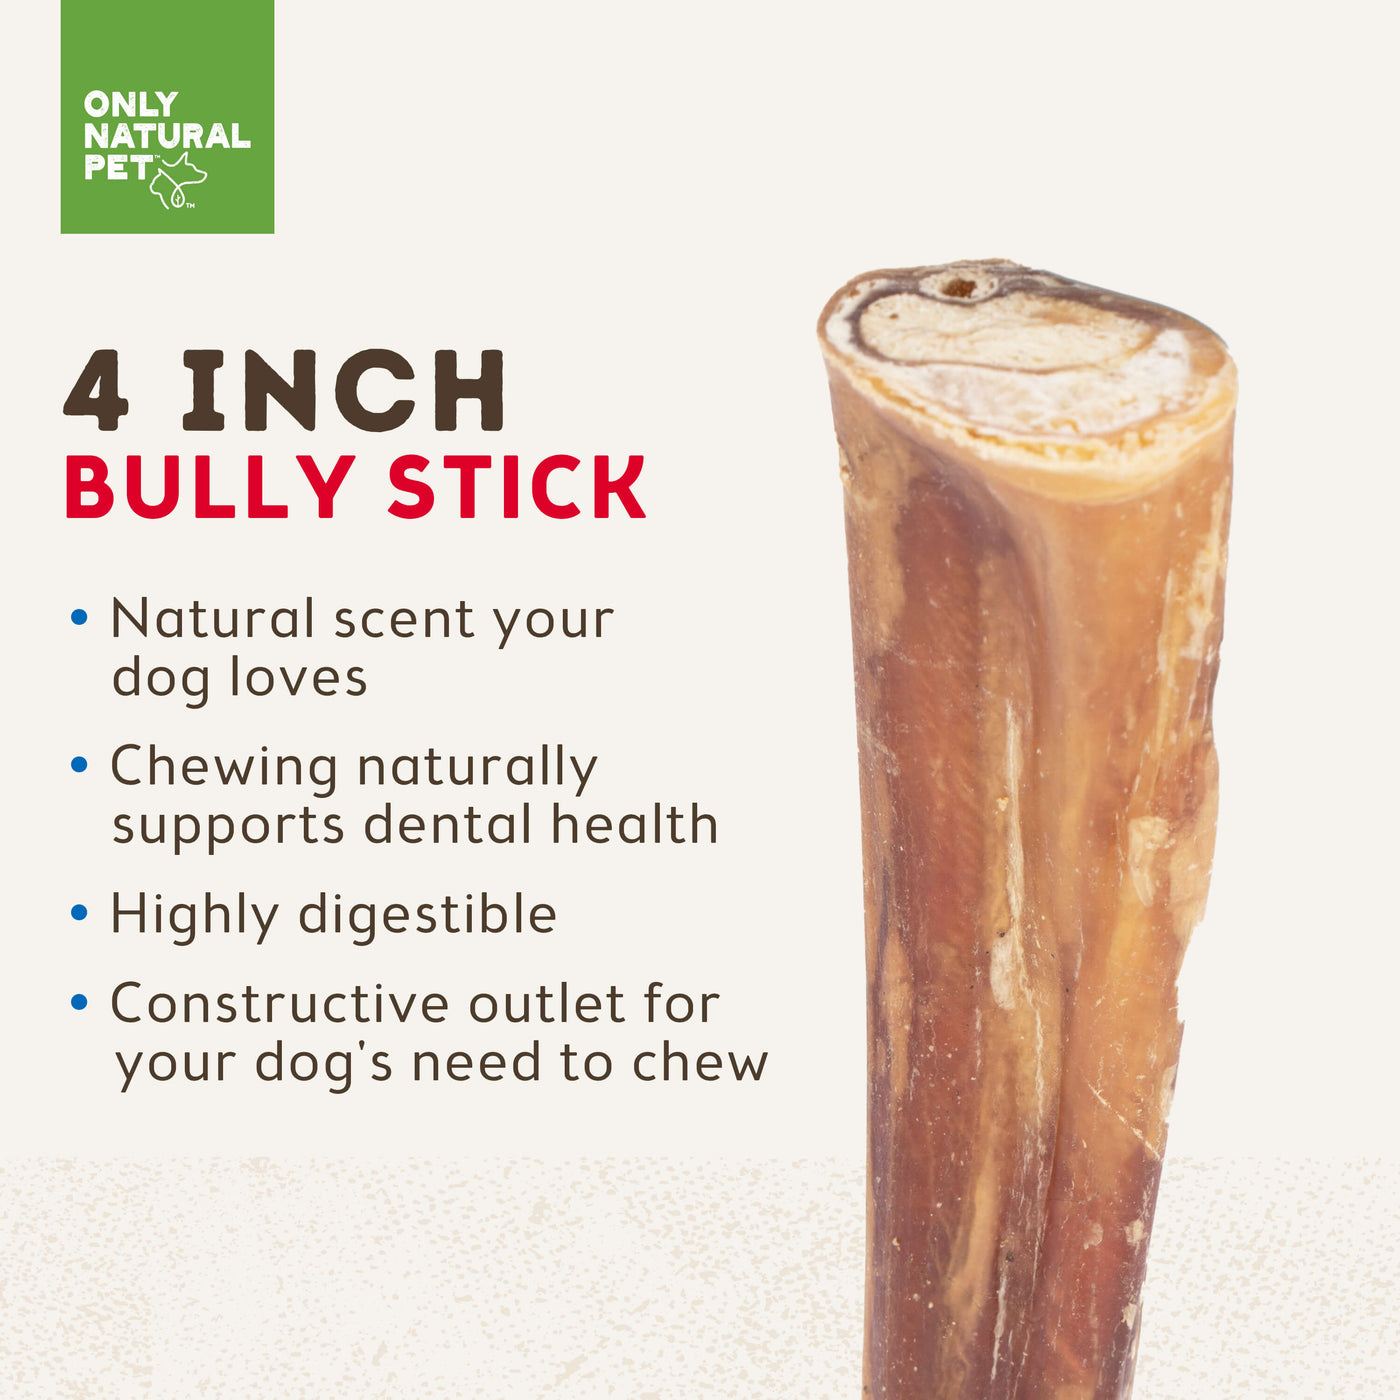 Are Bully Sticks Good For Dogs?